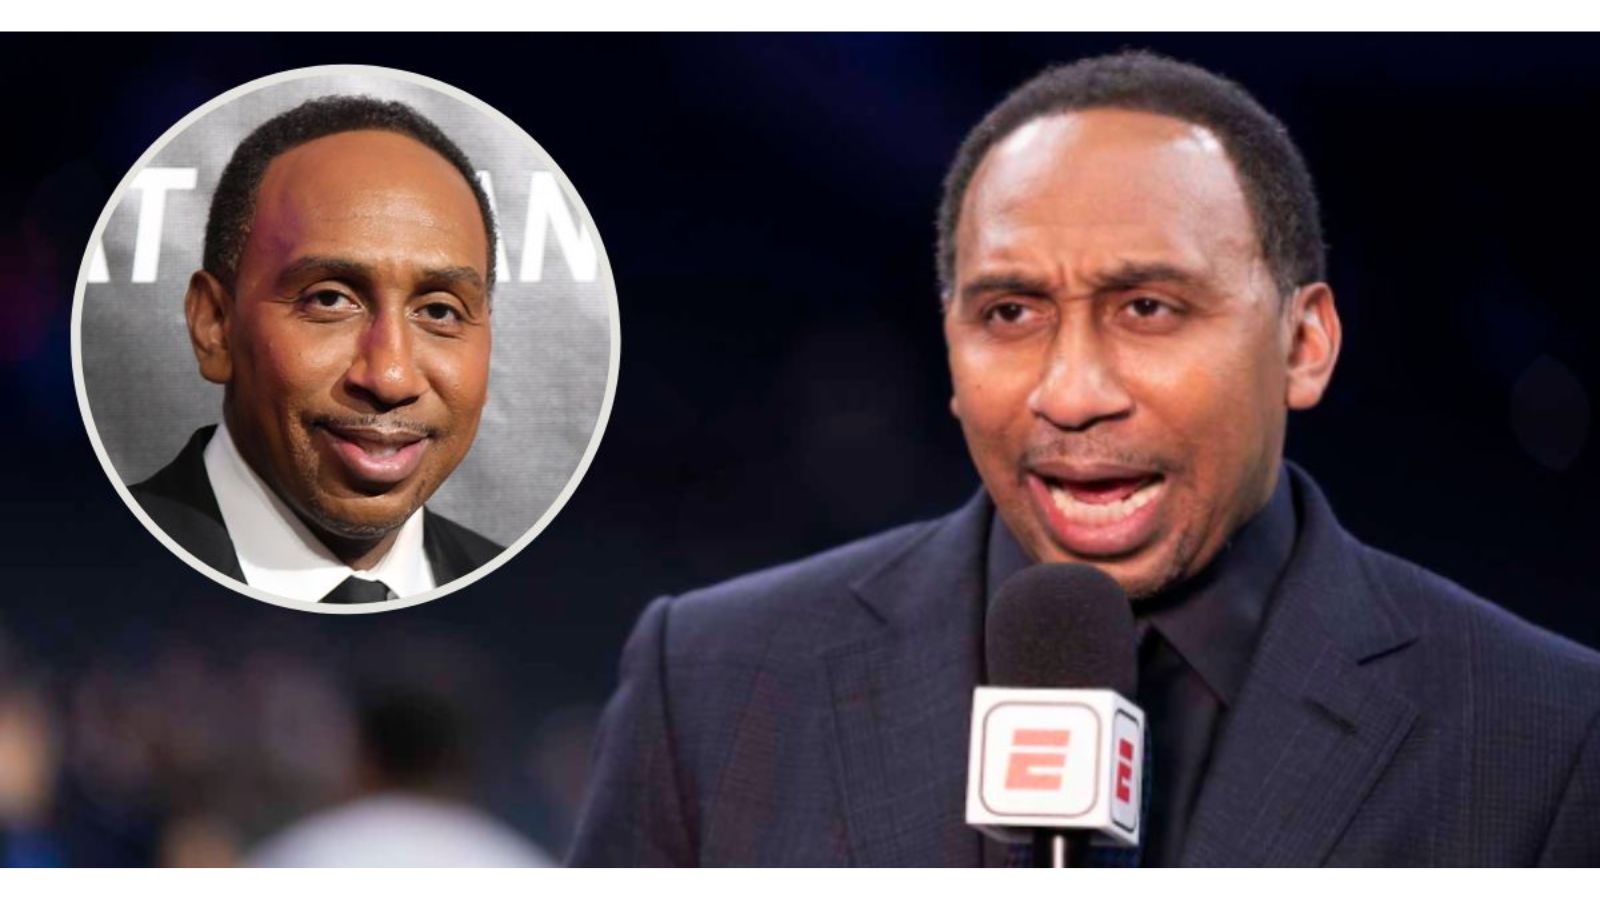 Is Stephen A. Smith Married